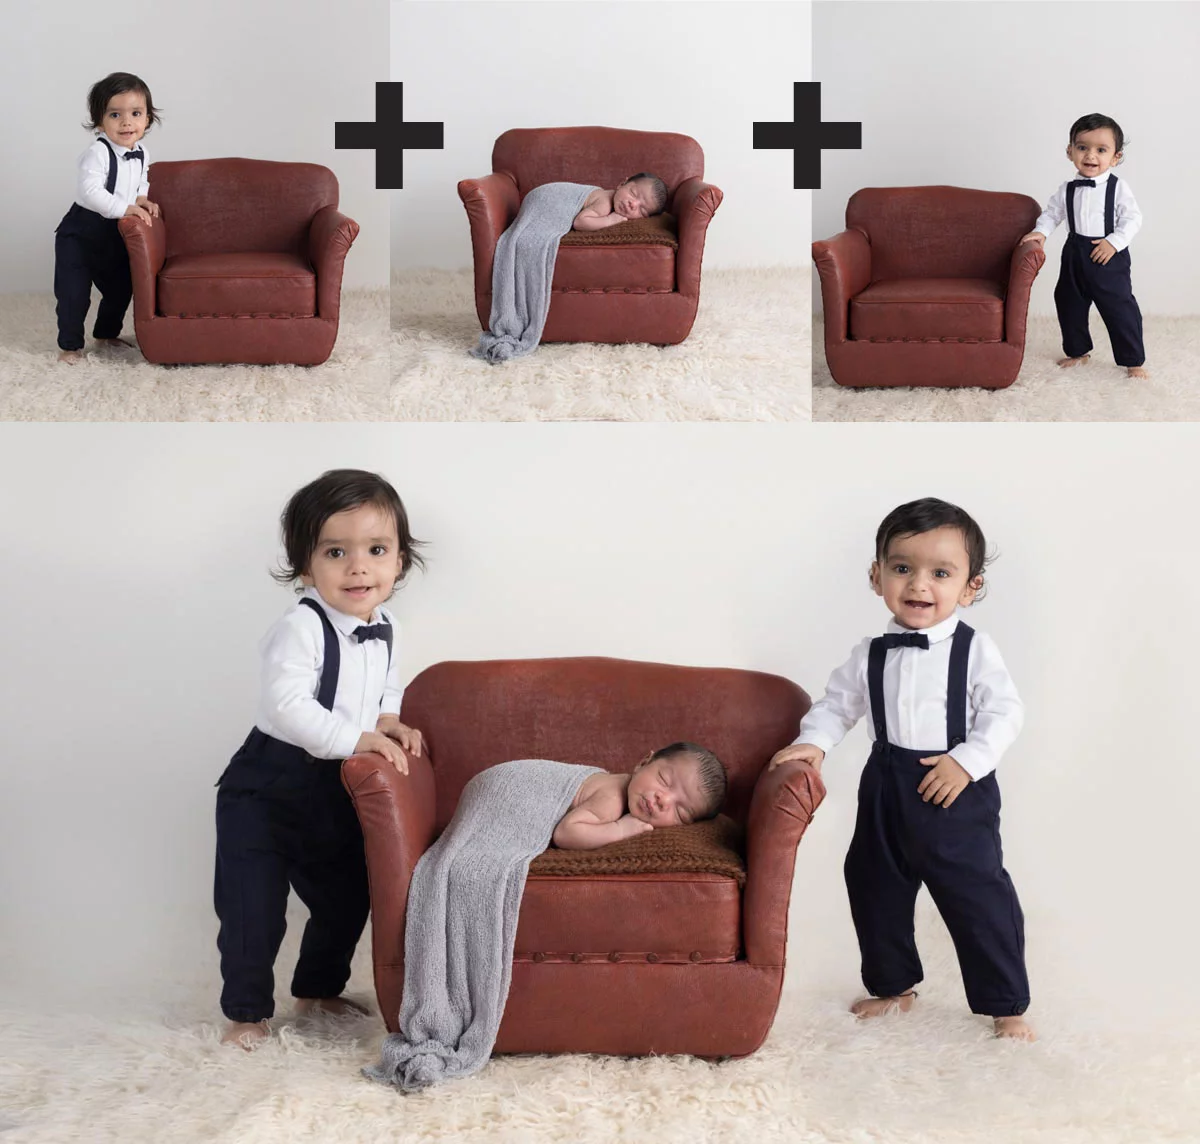 Sibling photos with newborn baby How-To Guide 10